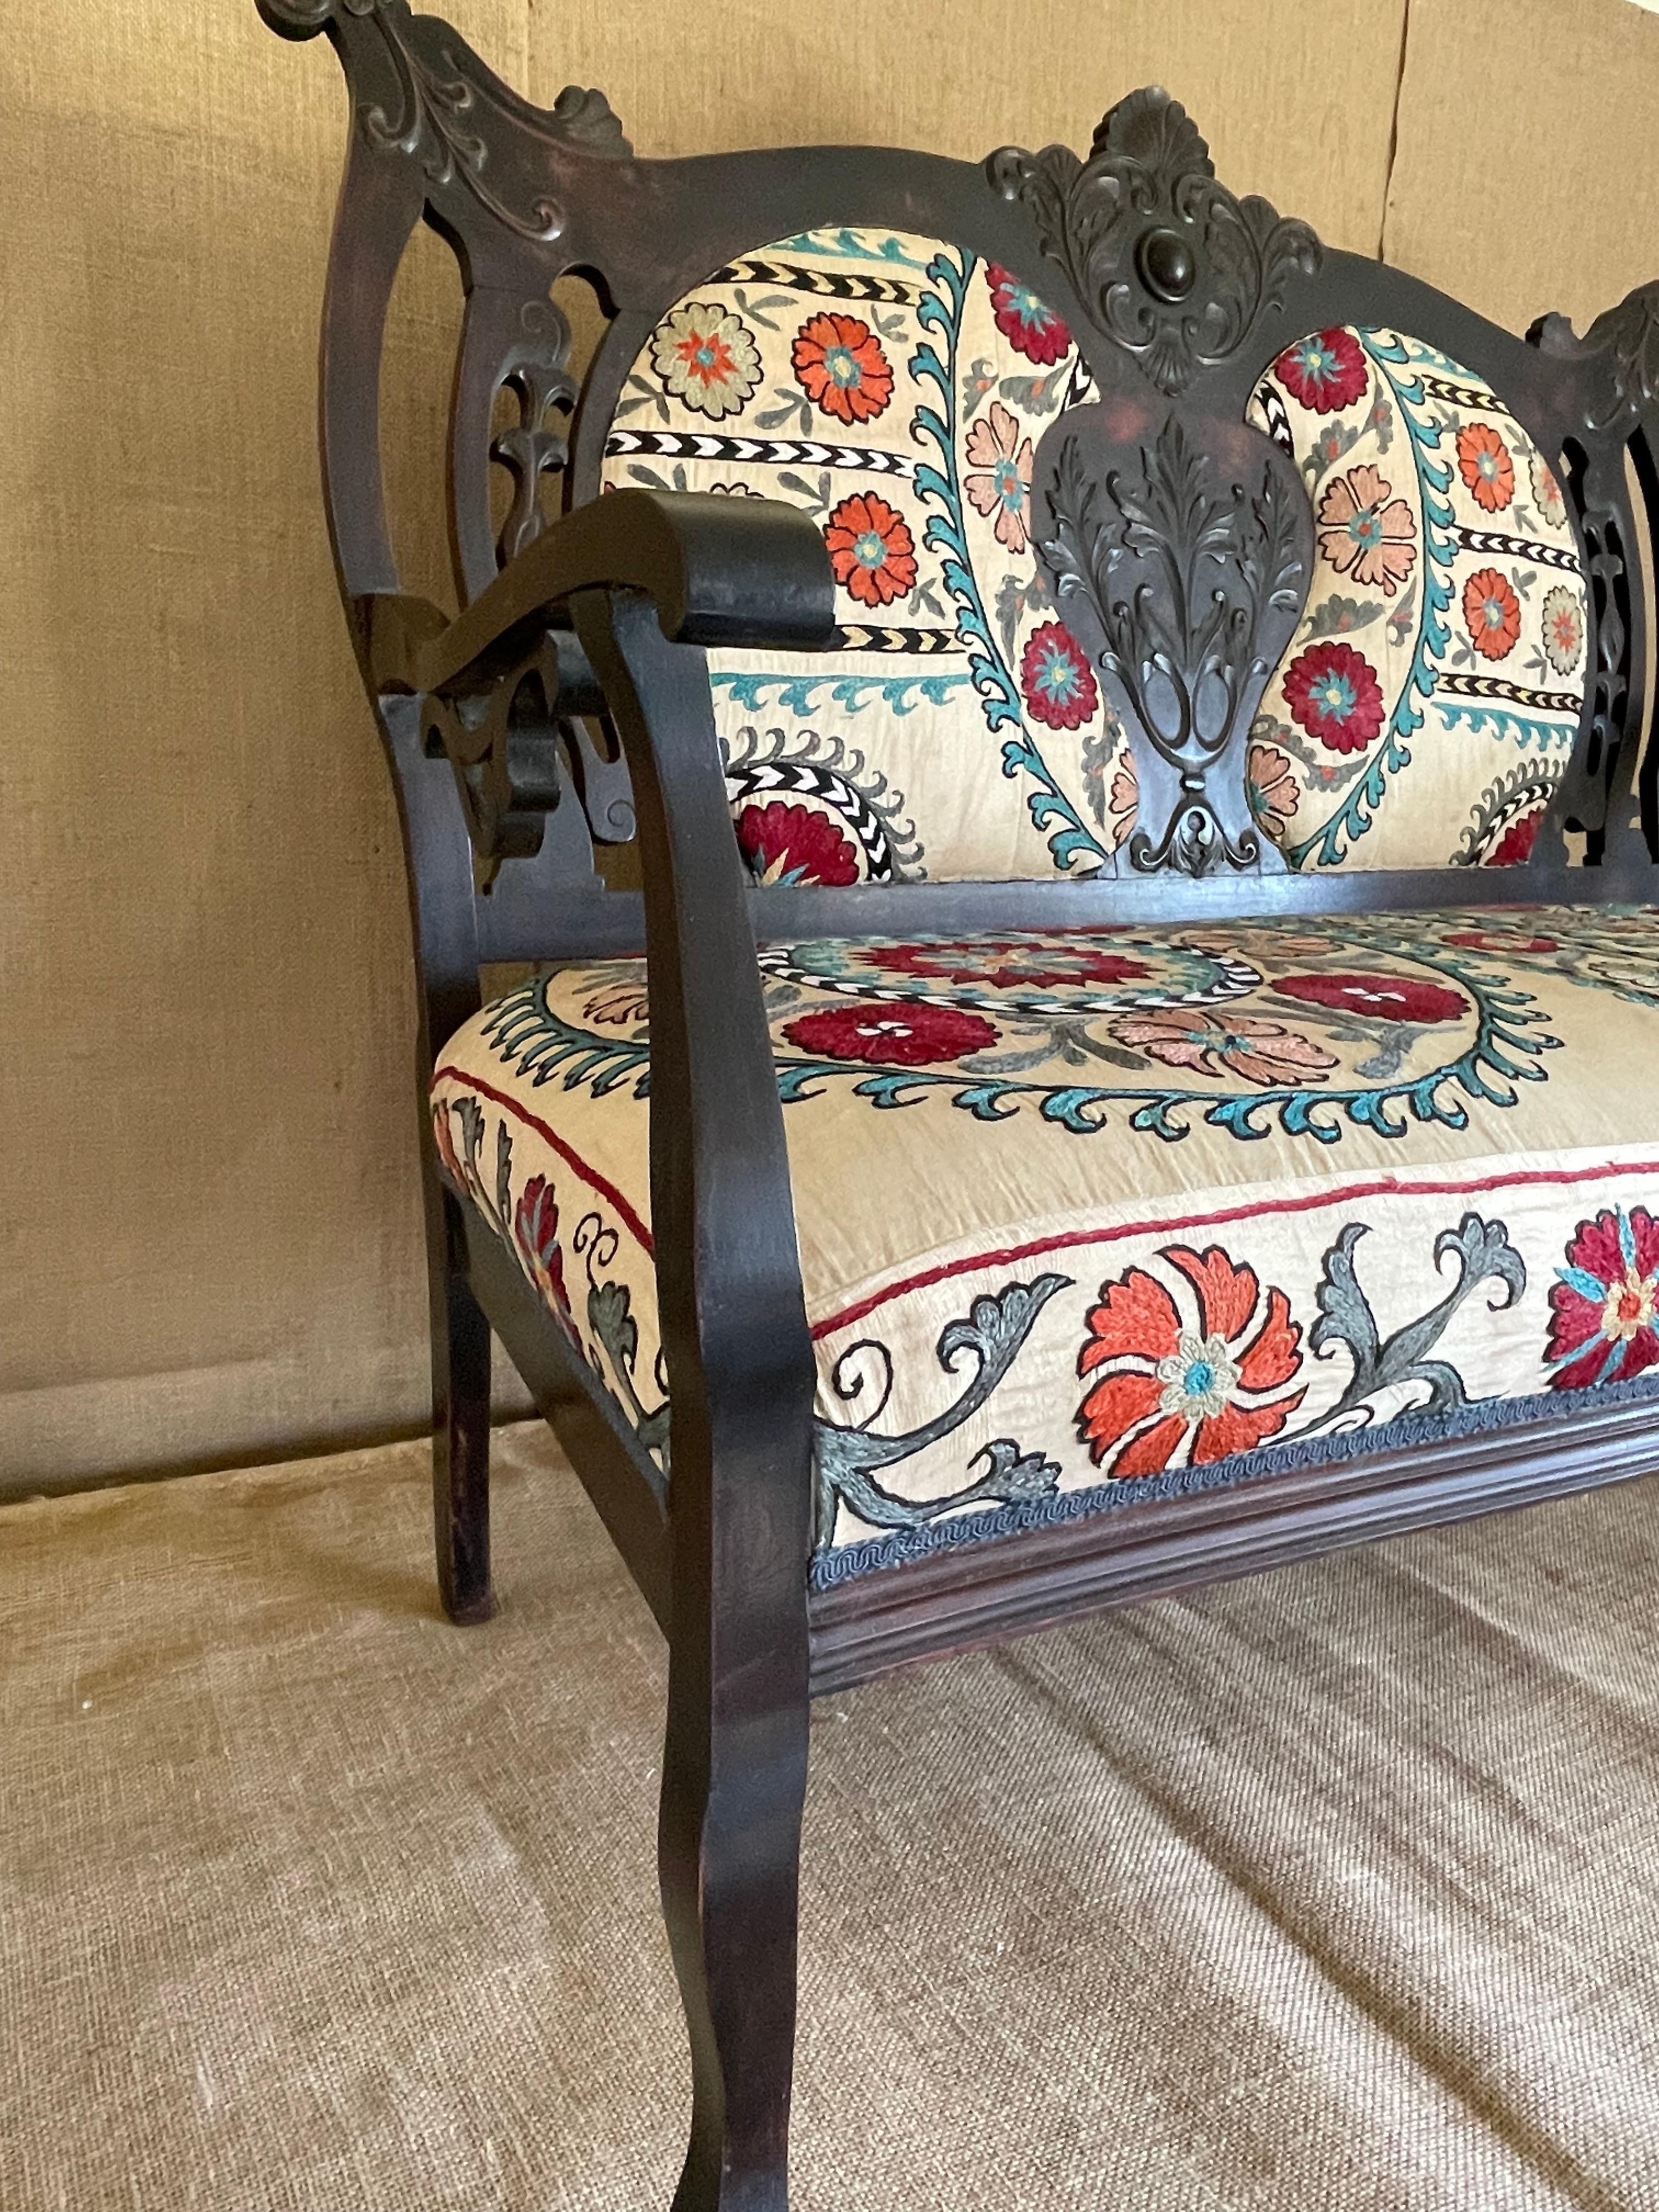 This love seat is made of carved mahogany in the Victorian style and has been reupholstered with a beautiful Antique Uzbek Suzani textile. The carved frame highlights the rich mahogany wood, while the exquisite textile adds a touch of elegance and